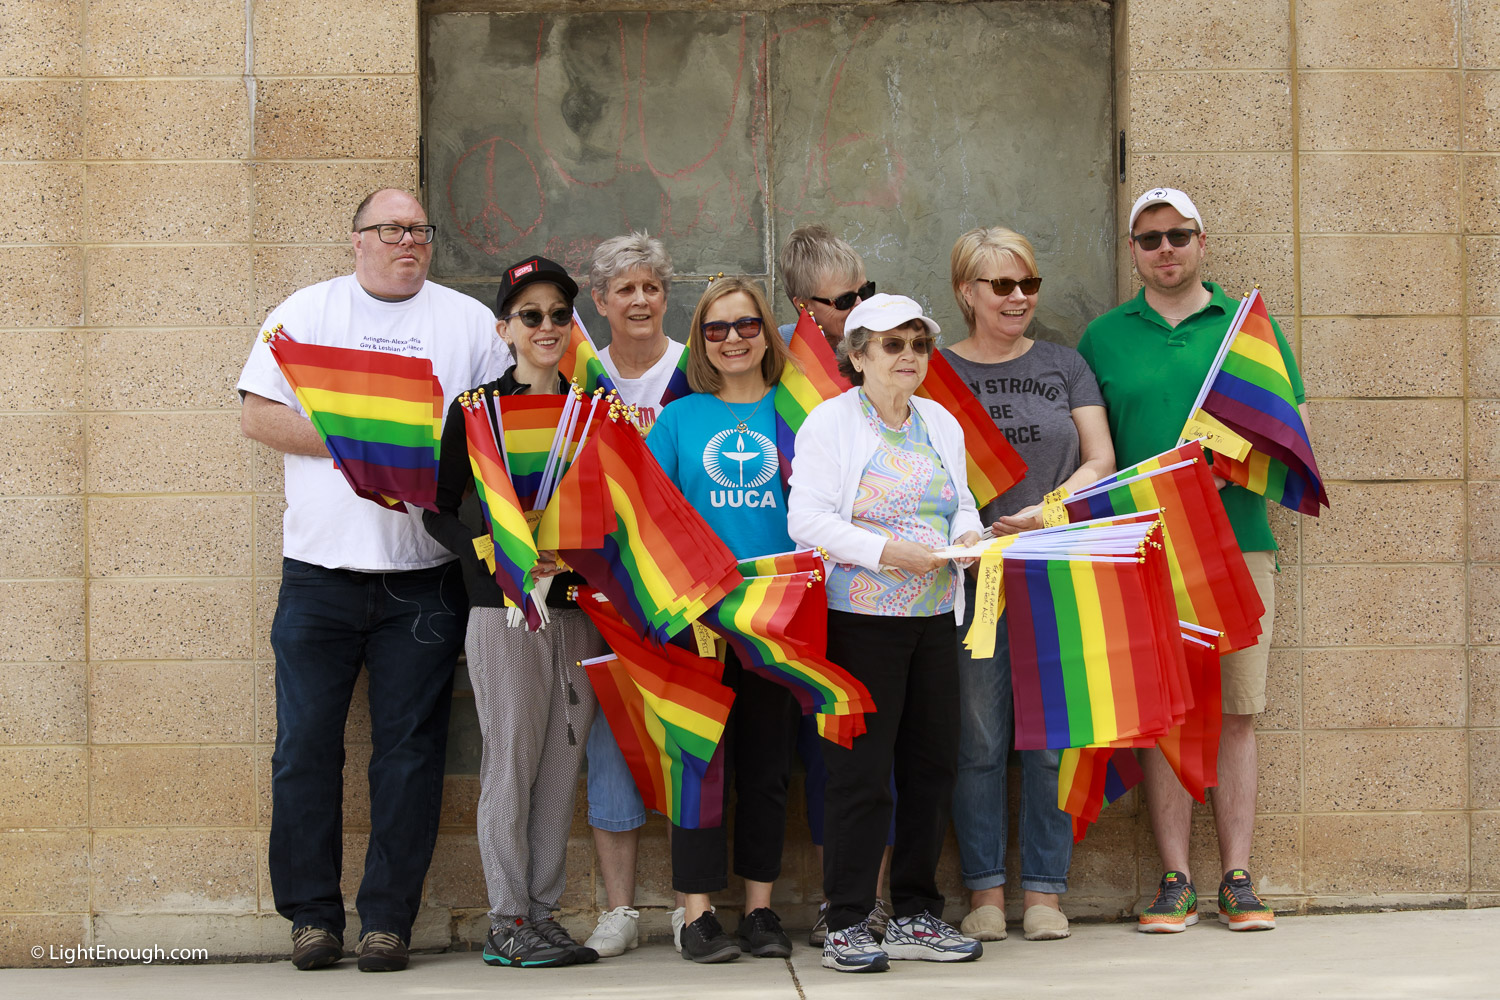  UUCA members prepare to plant Pride Flags at Pride Flag day on Saturday June 3, 2017. Photo by John St Hilaire/LightEnough.com. 